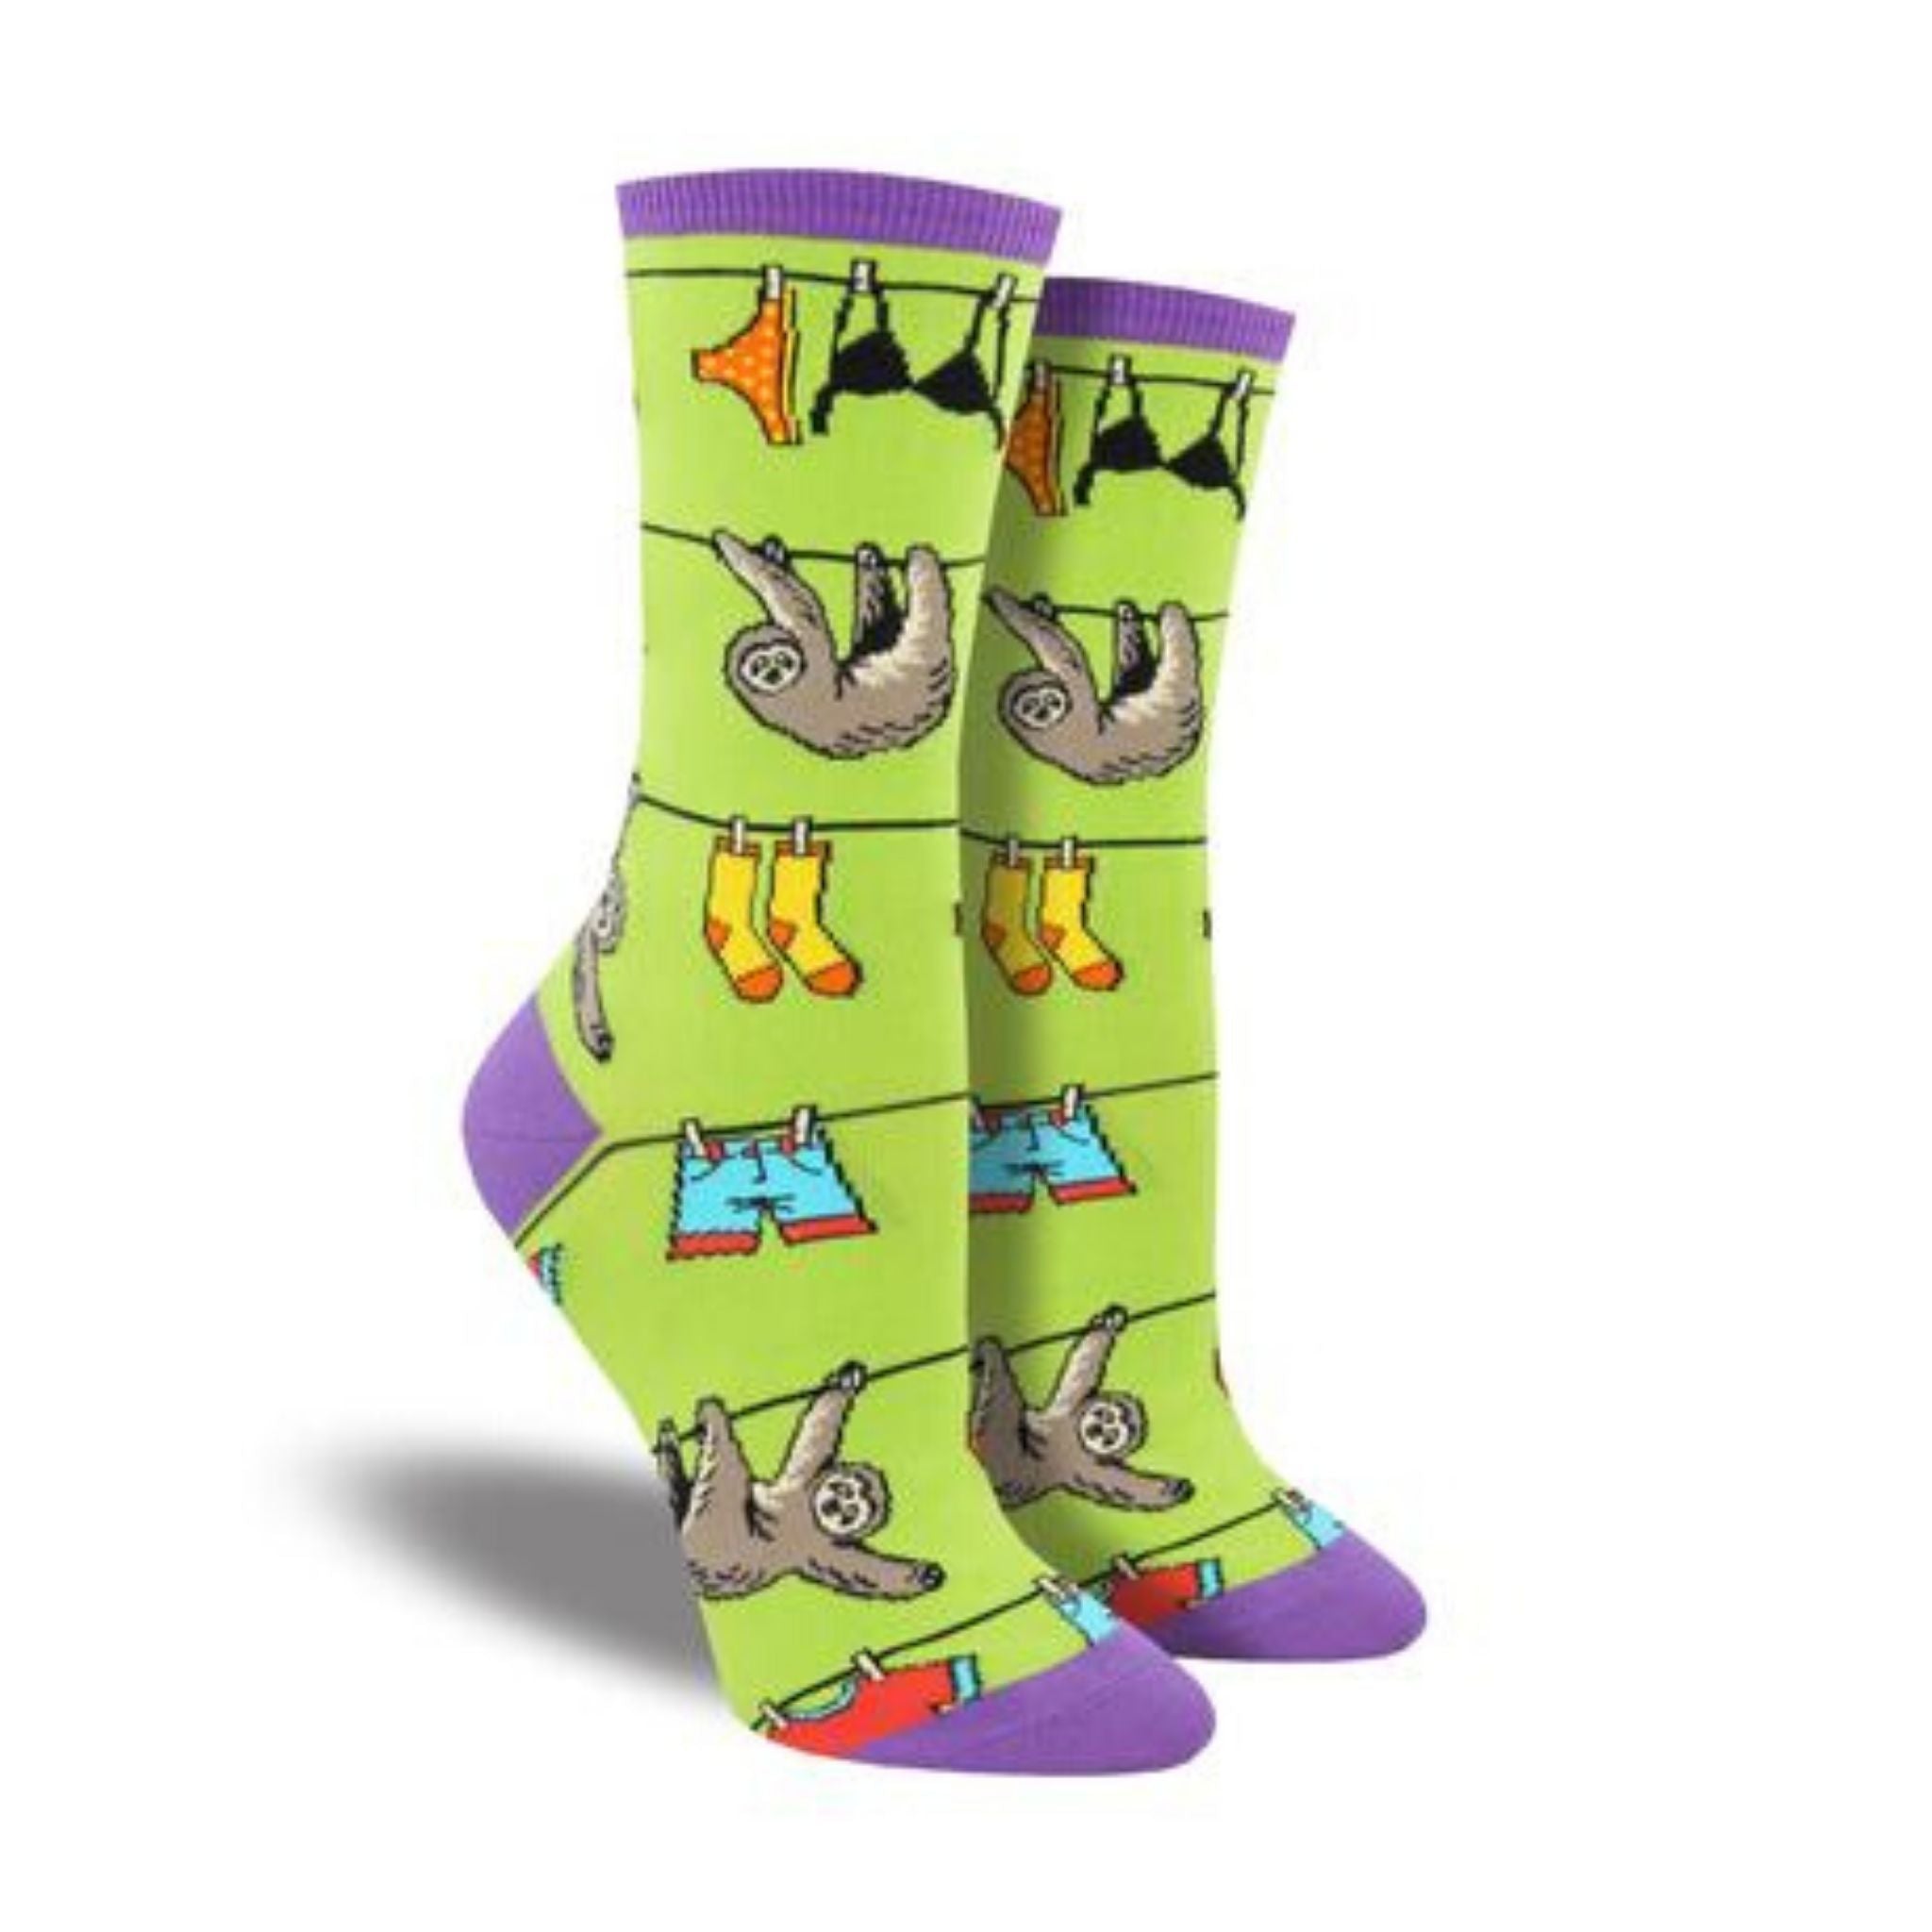 Green socks with purple accents featuring sloths climbing clothing line with items hanging to dry